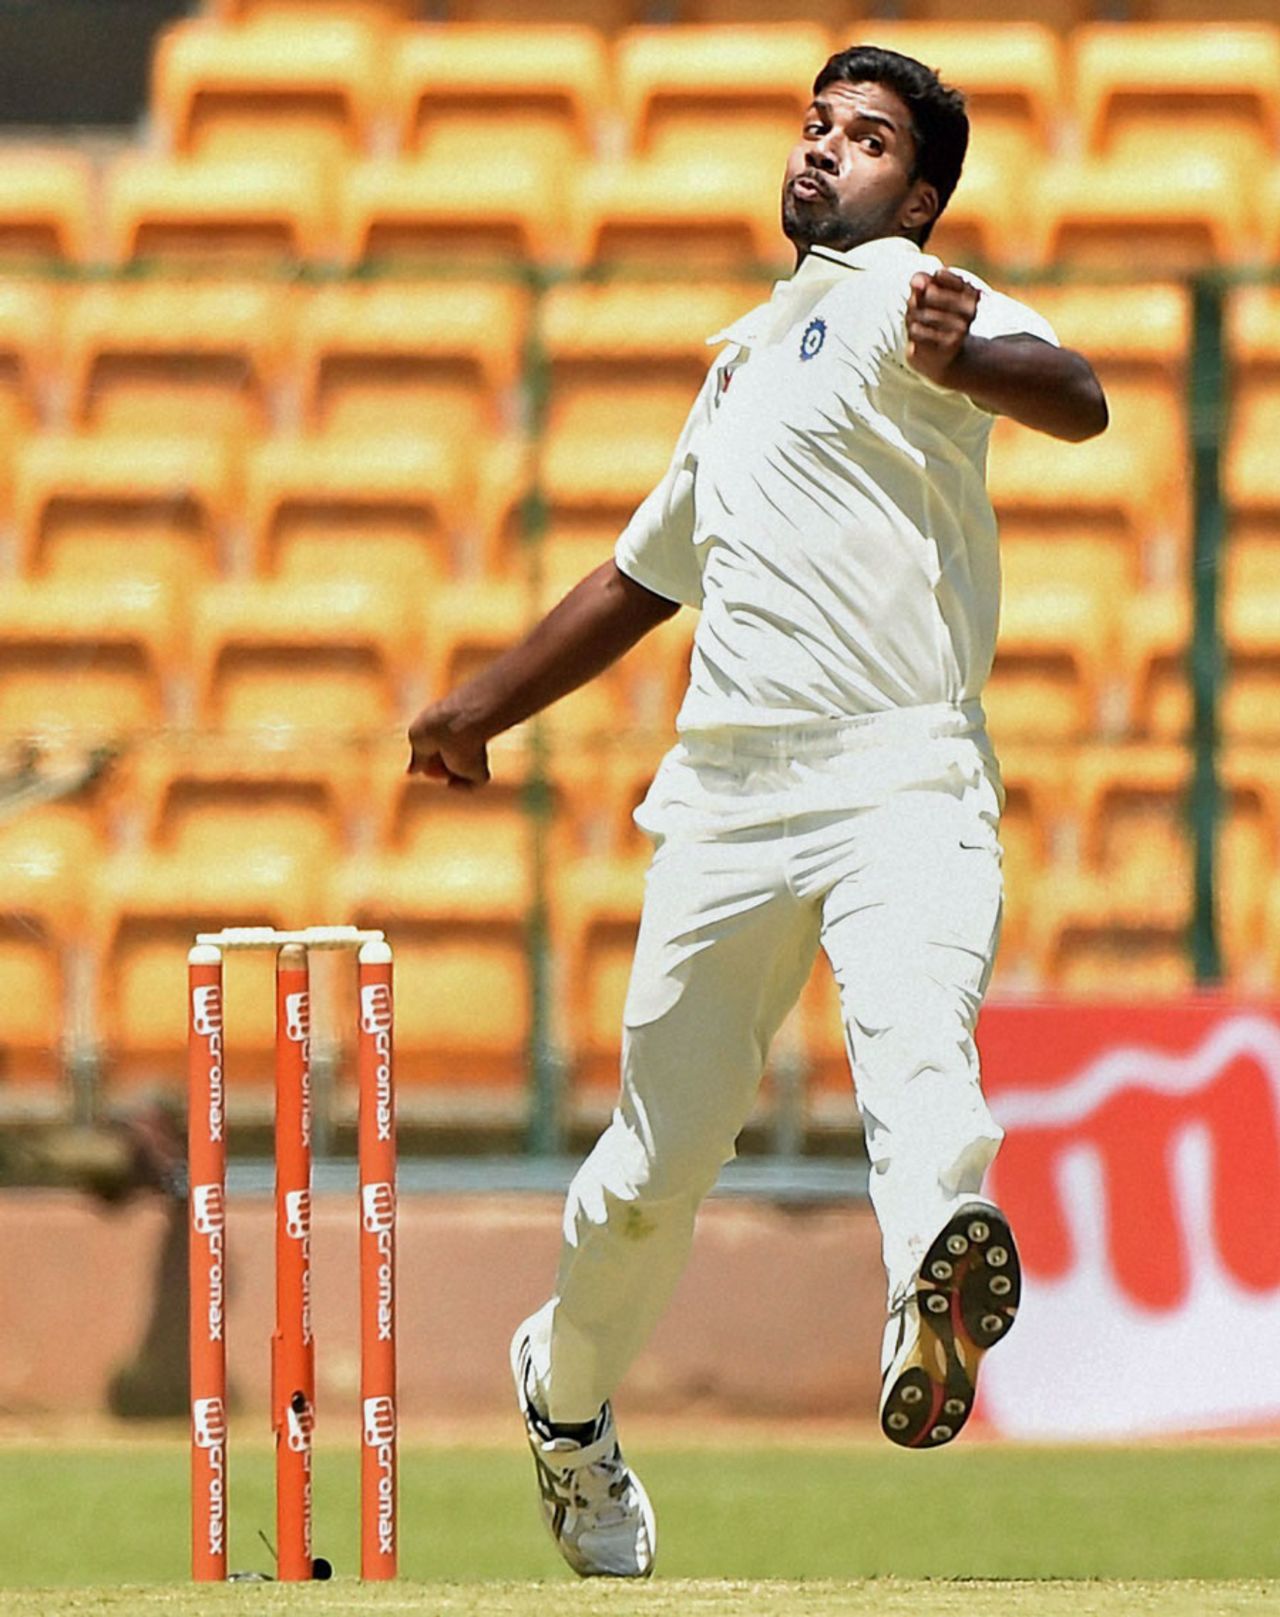 Varun Aaron in his delivery stride, Karnataka v Rest of India, Irani Cup 2014-15, 1st day, Bangalore, March 17, 2015